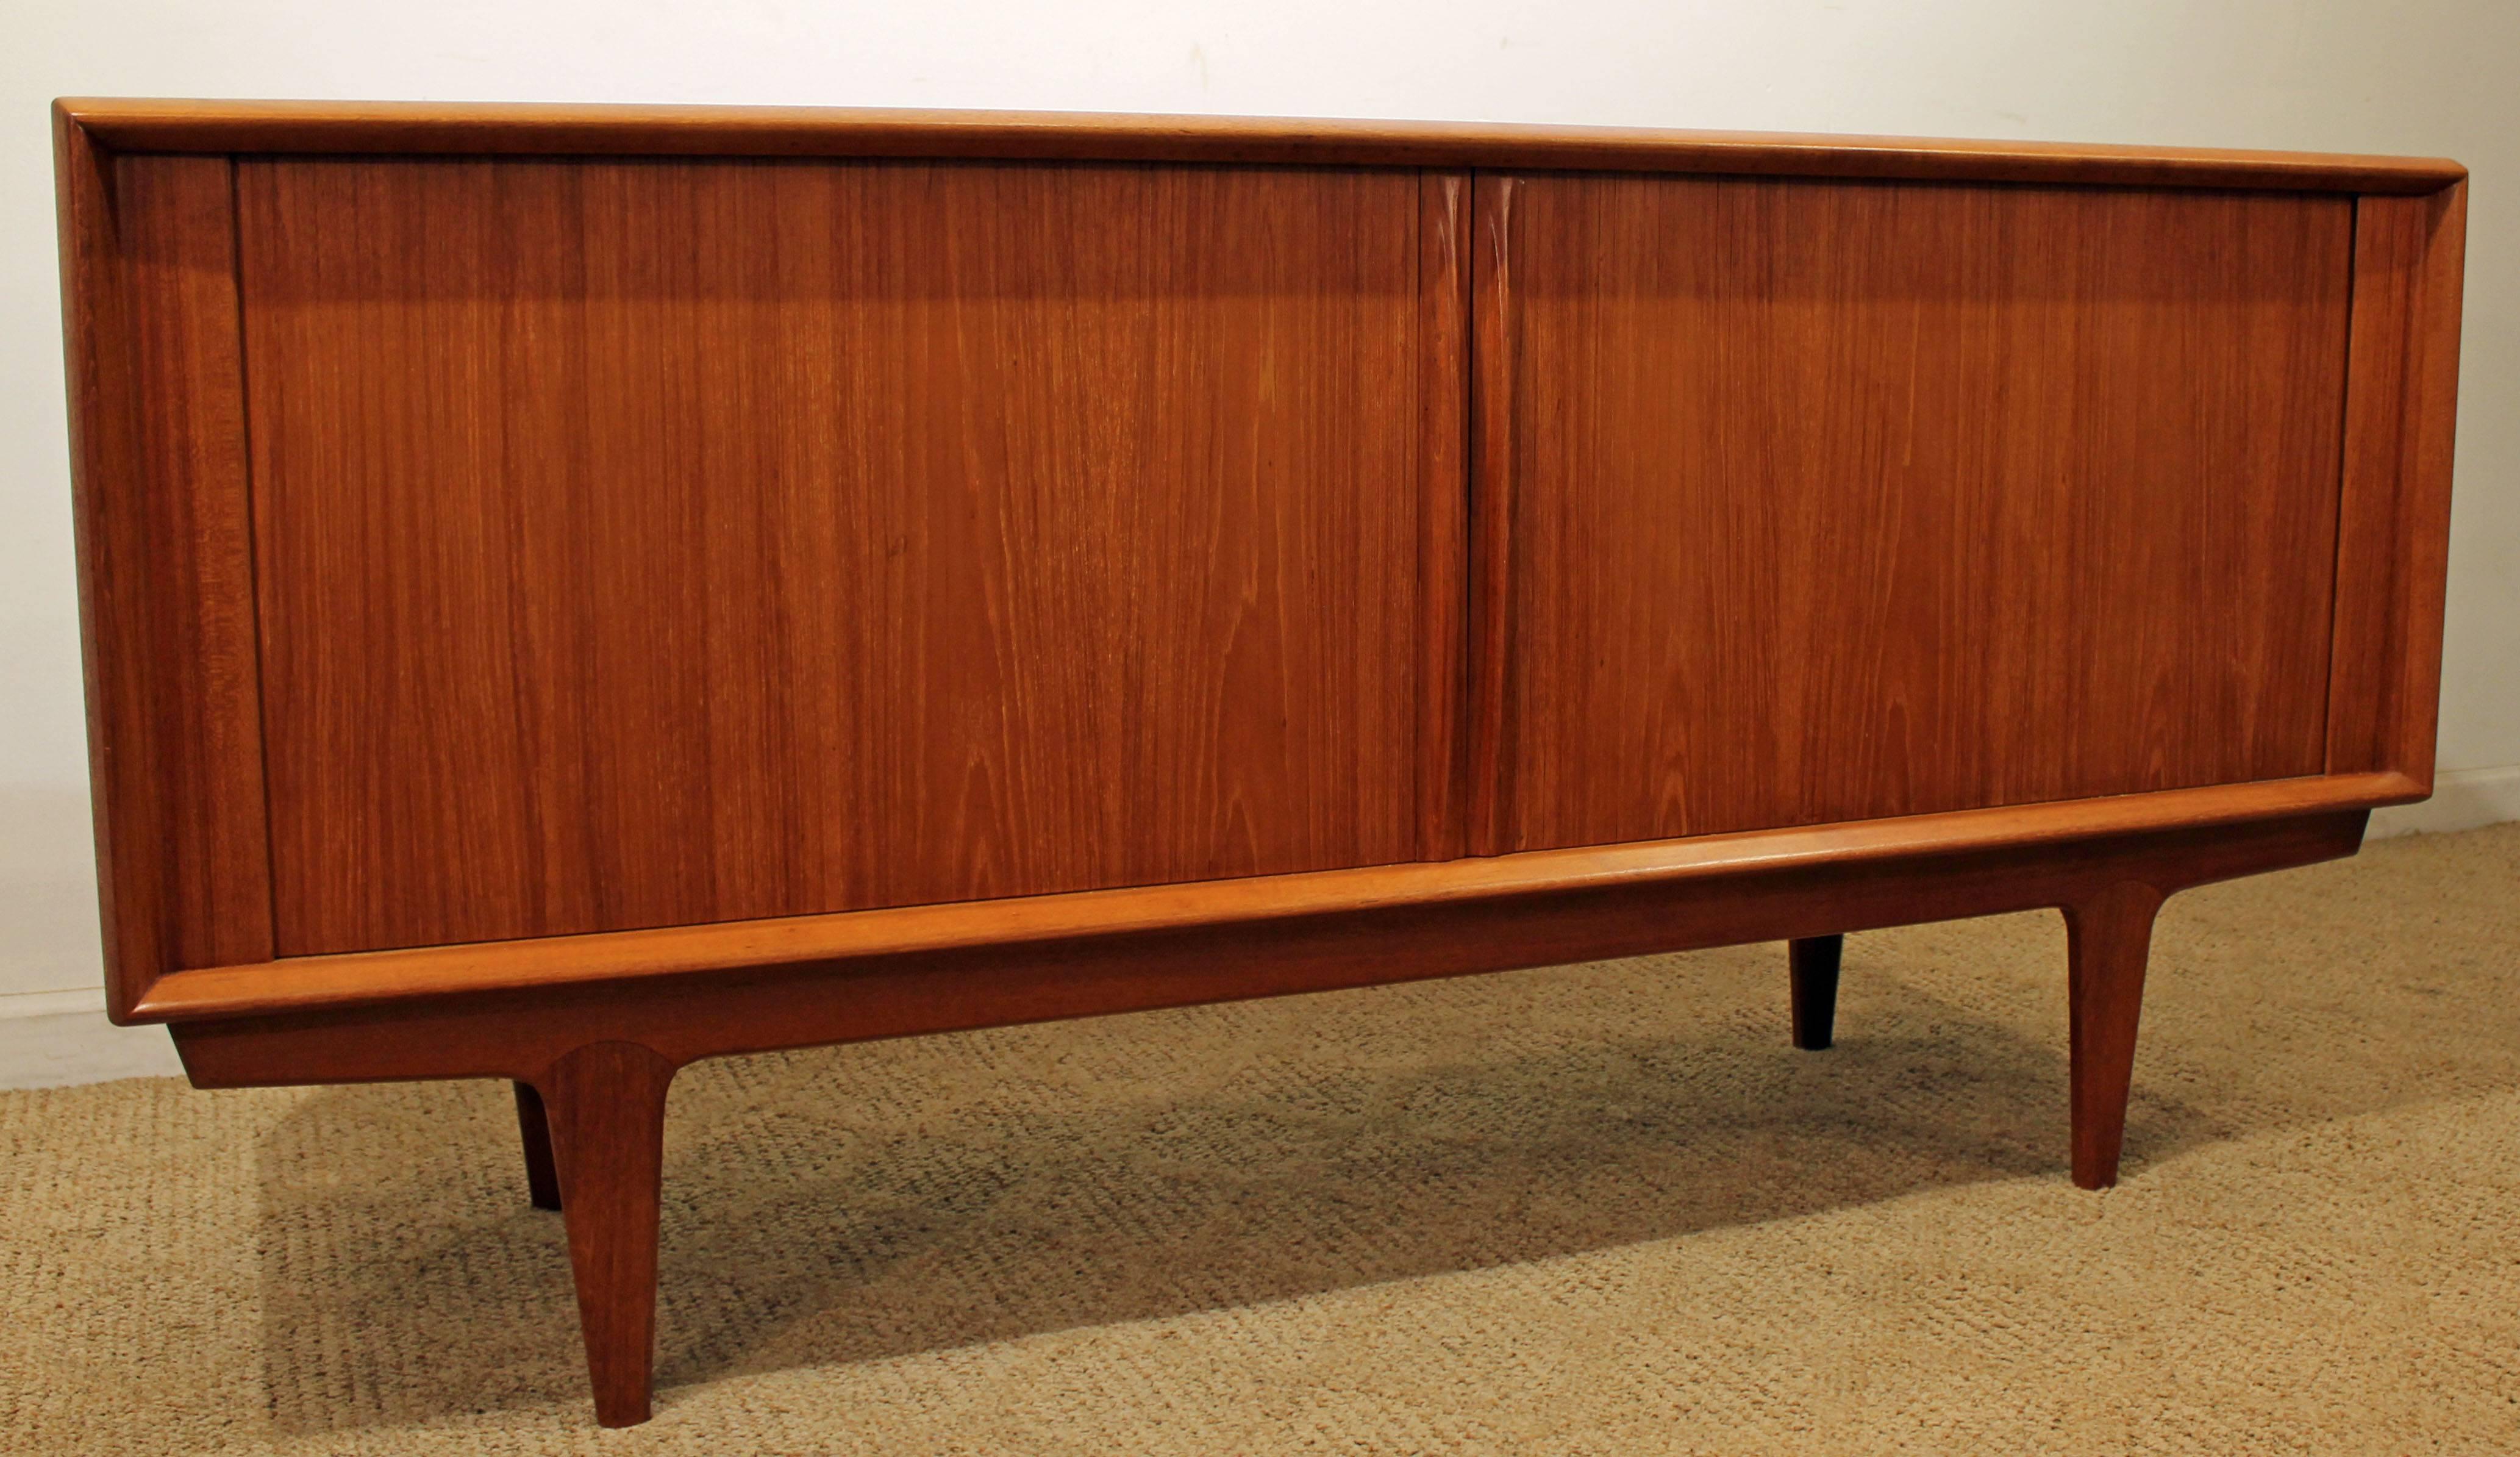 Offered is a Danish Modern teak credenza. Features tambour doors with shelving and . The piece has the look with clean lines and good organization. Features sliding tambour doors with adjustable shelving and three center drawers. It is in excellent